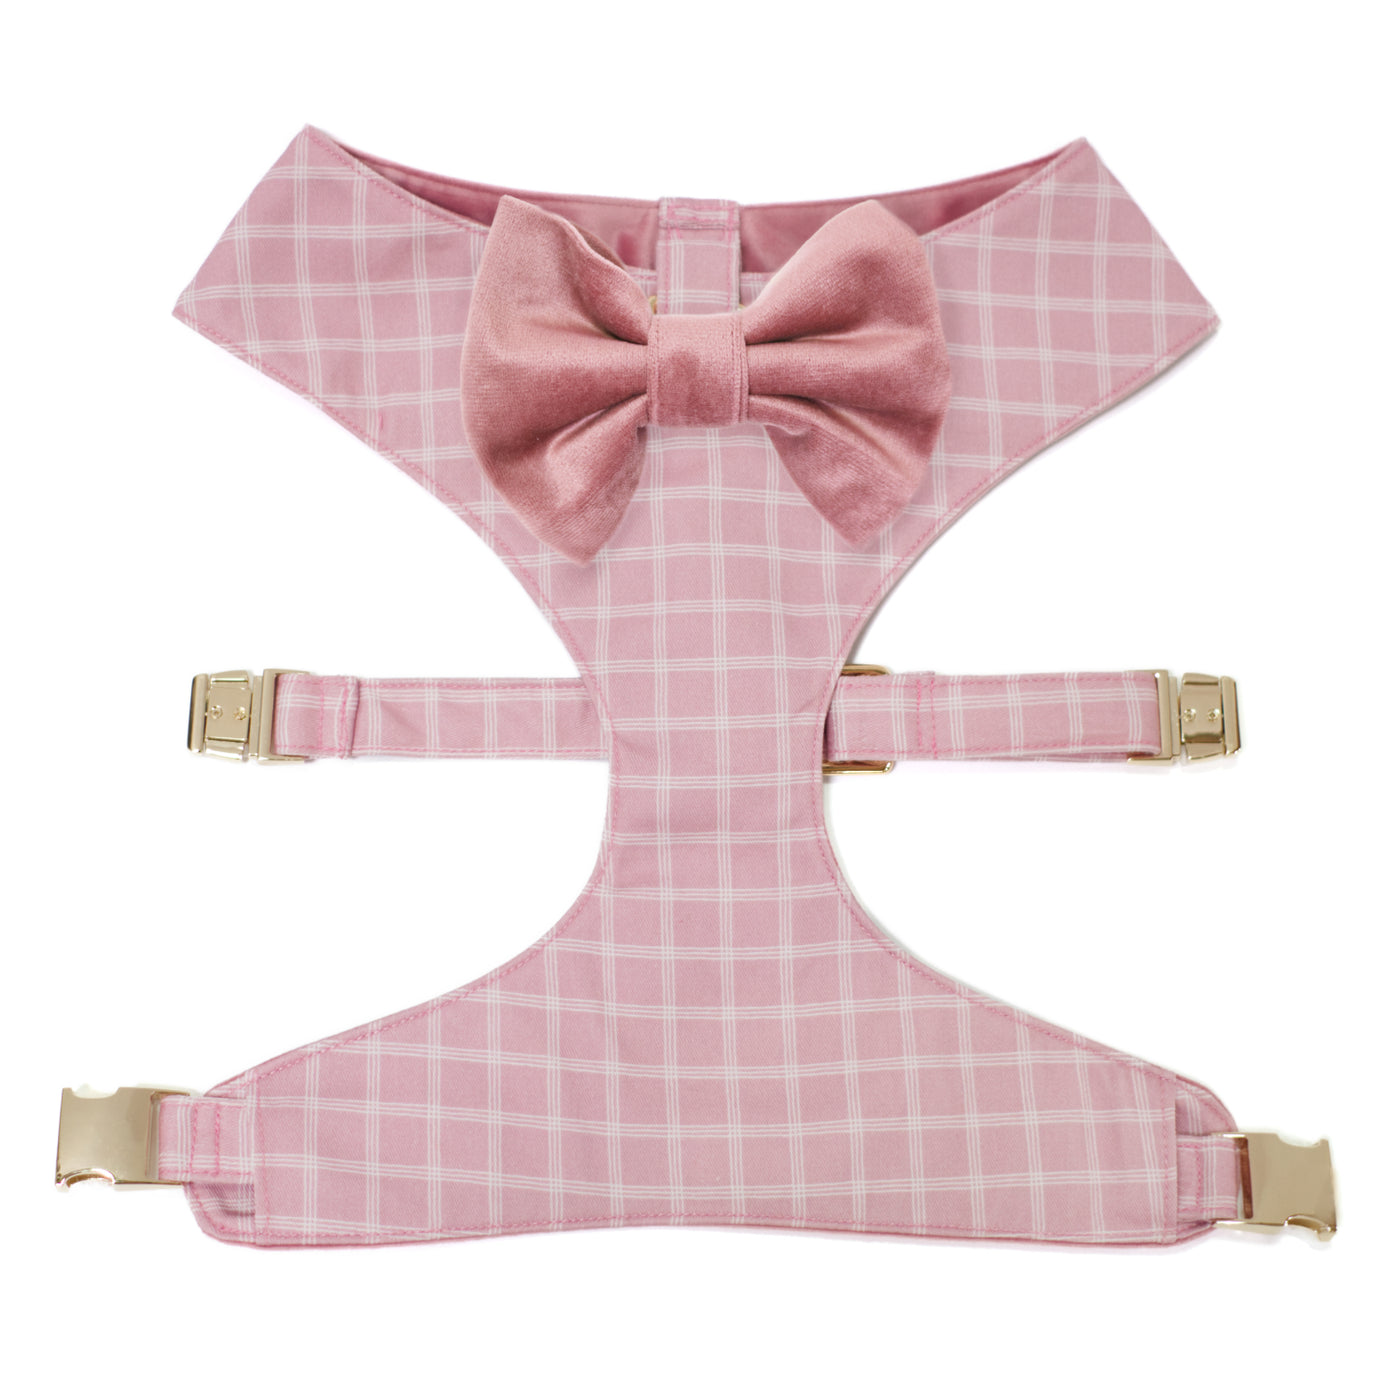 Light pink triple windowpane plaid reversible dog harness with gold hardware and velvet classic dog bow tie